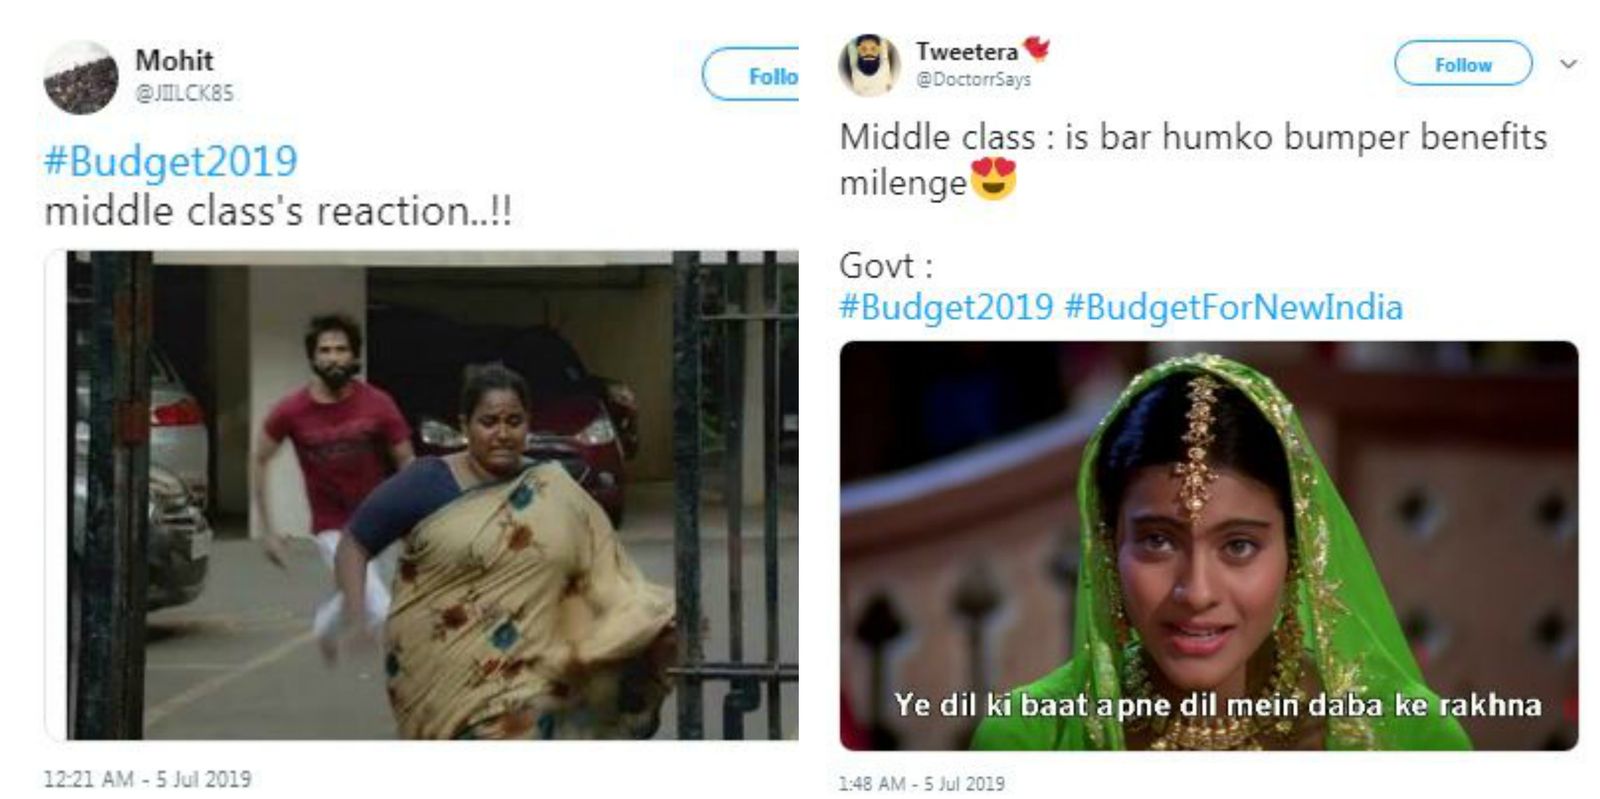 Budget 2019: Twitter Is Flooded With Bollywood Inspired ‘Middle Class’ Memes And They Are Hilarious AF